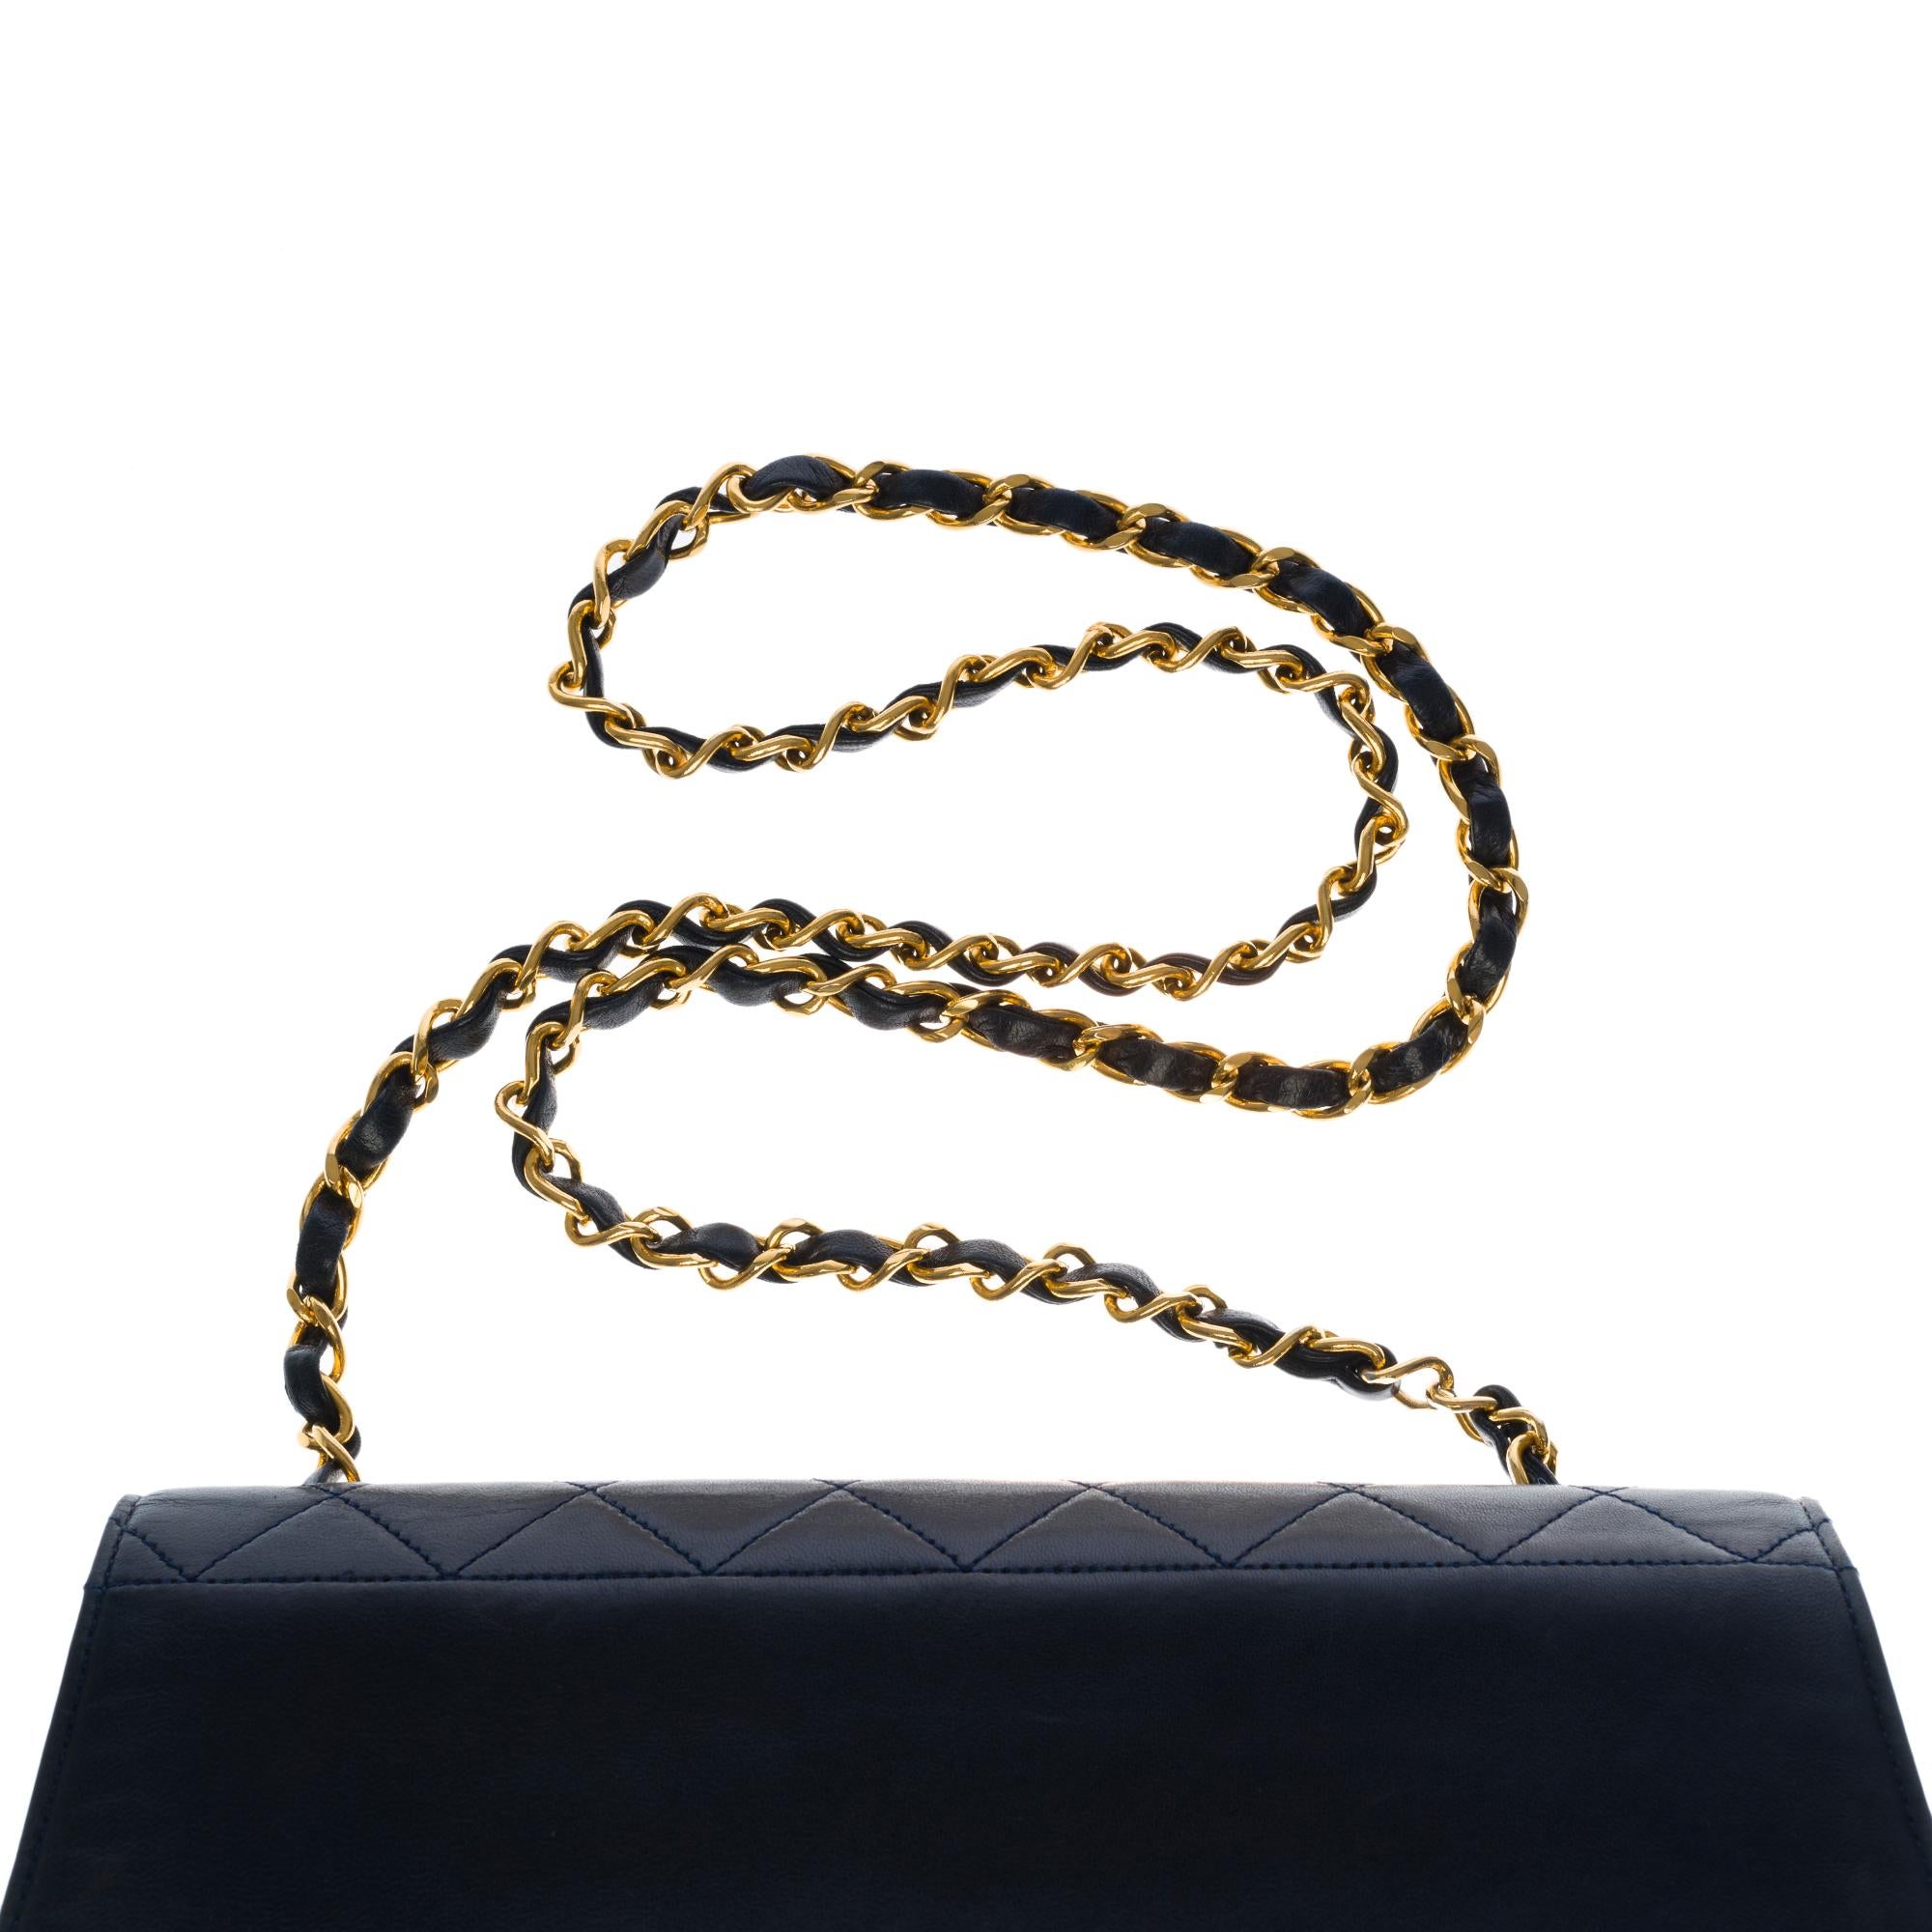 Ultra Rare Chanel Trapeze navy blue shoulder bag and gold hardware 1